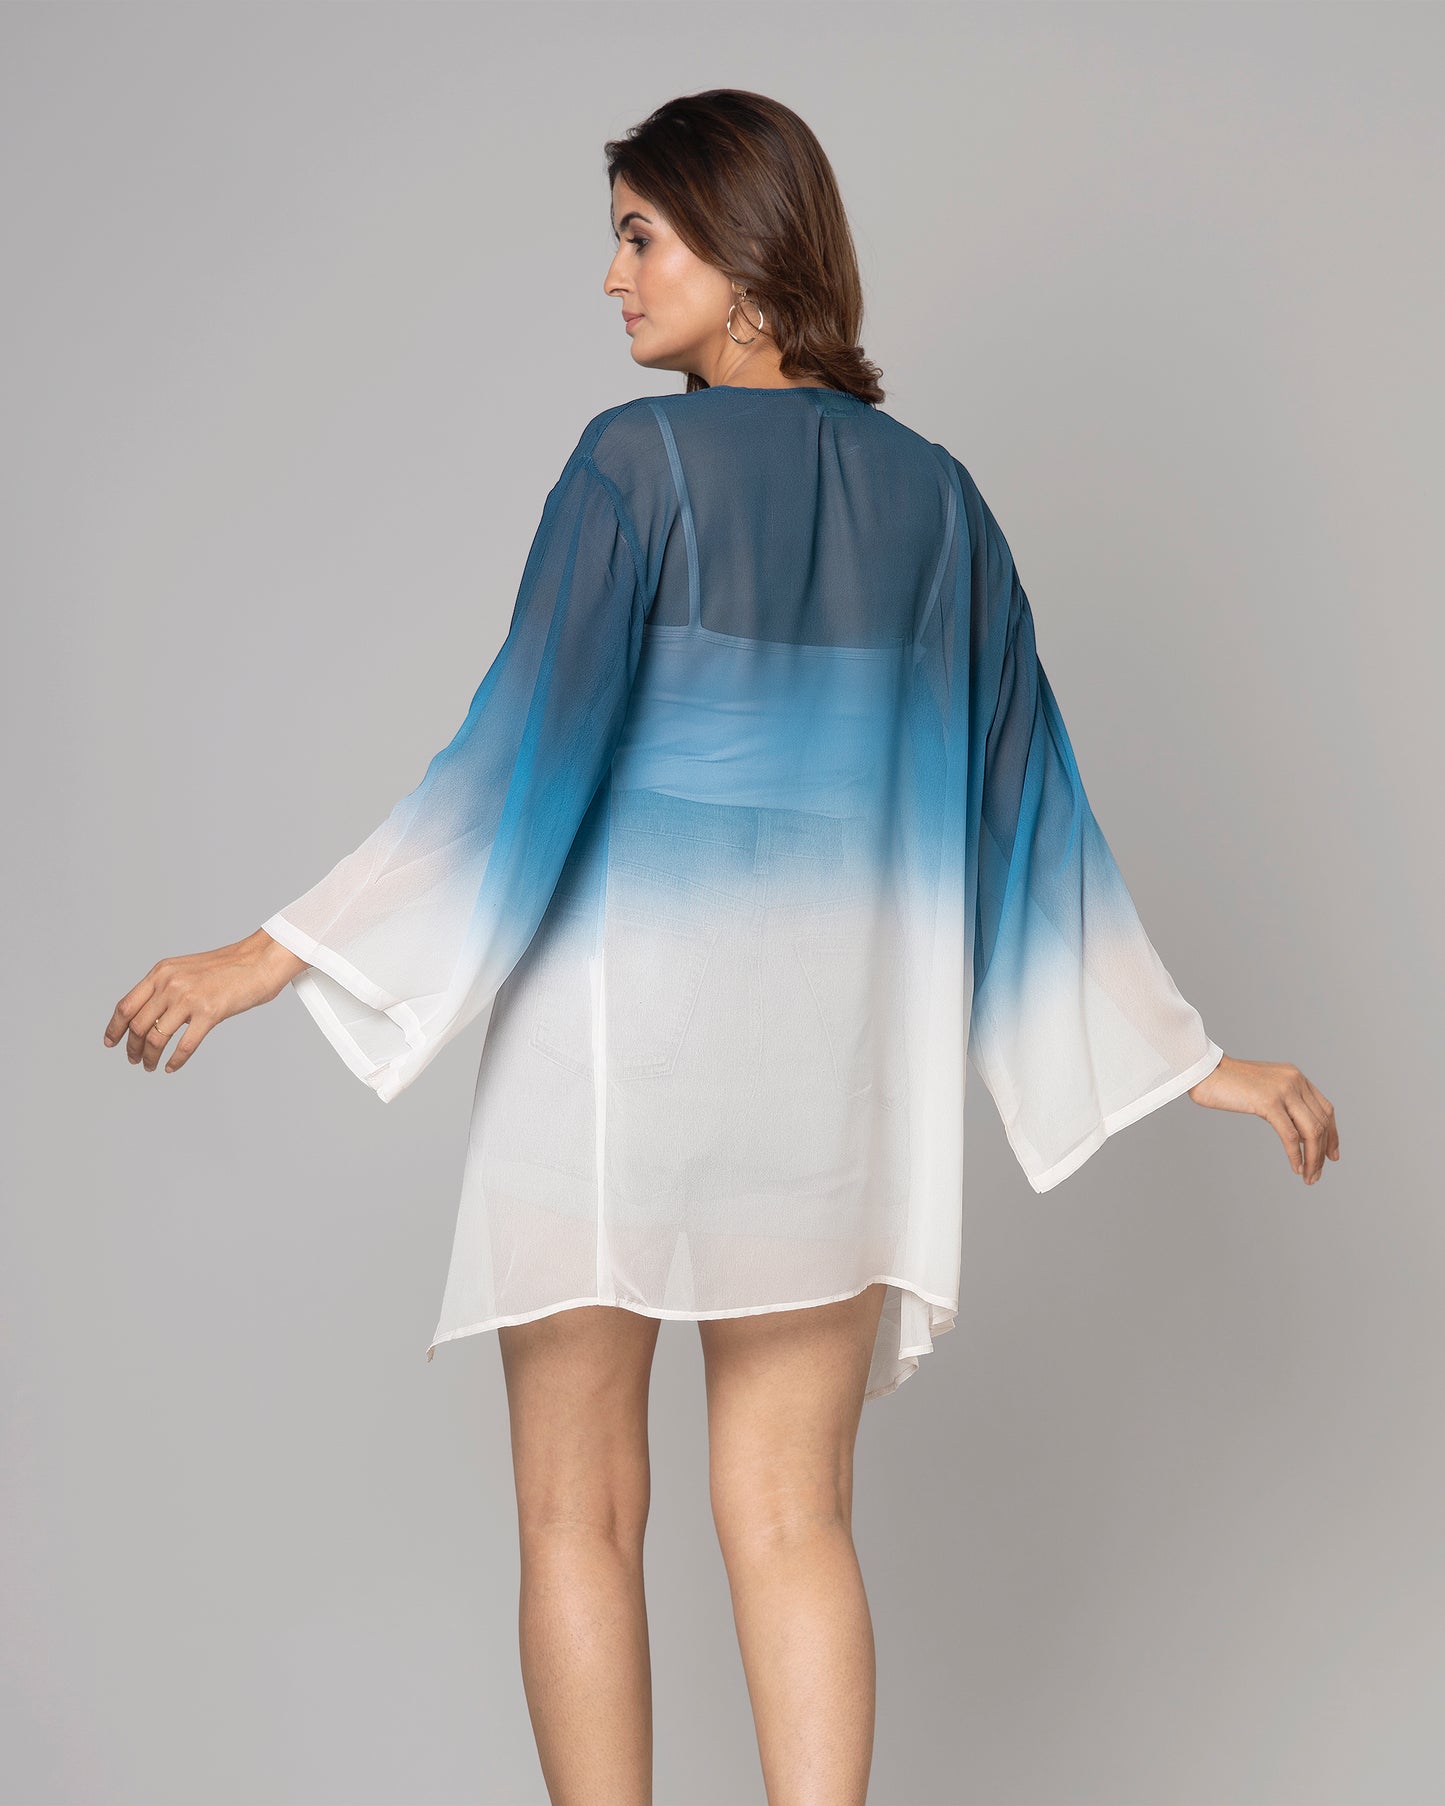 Stylish Ombre Shrug For Woman